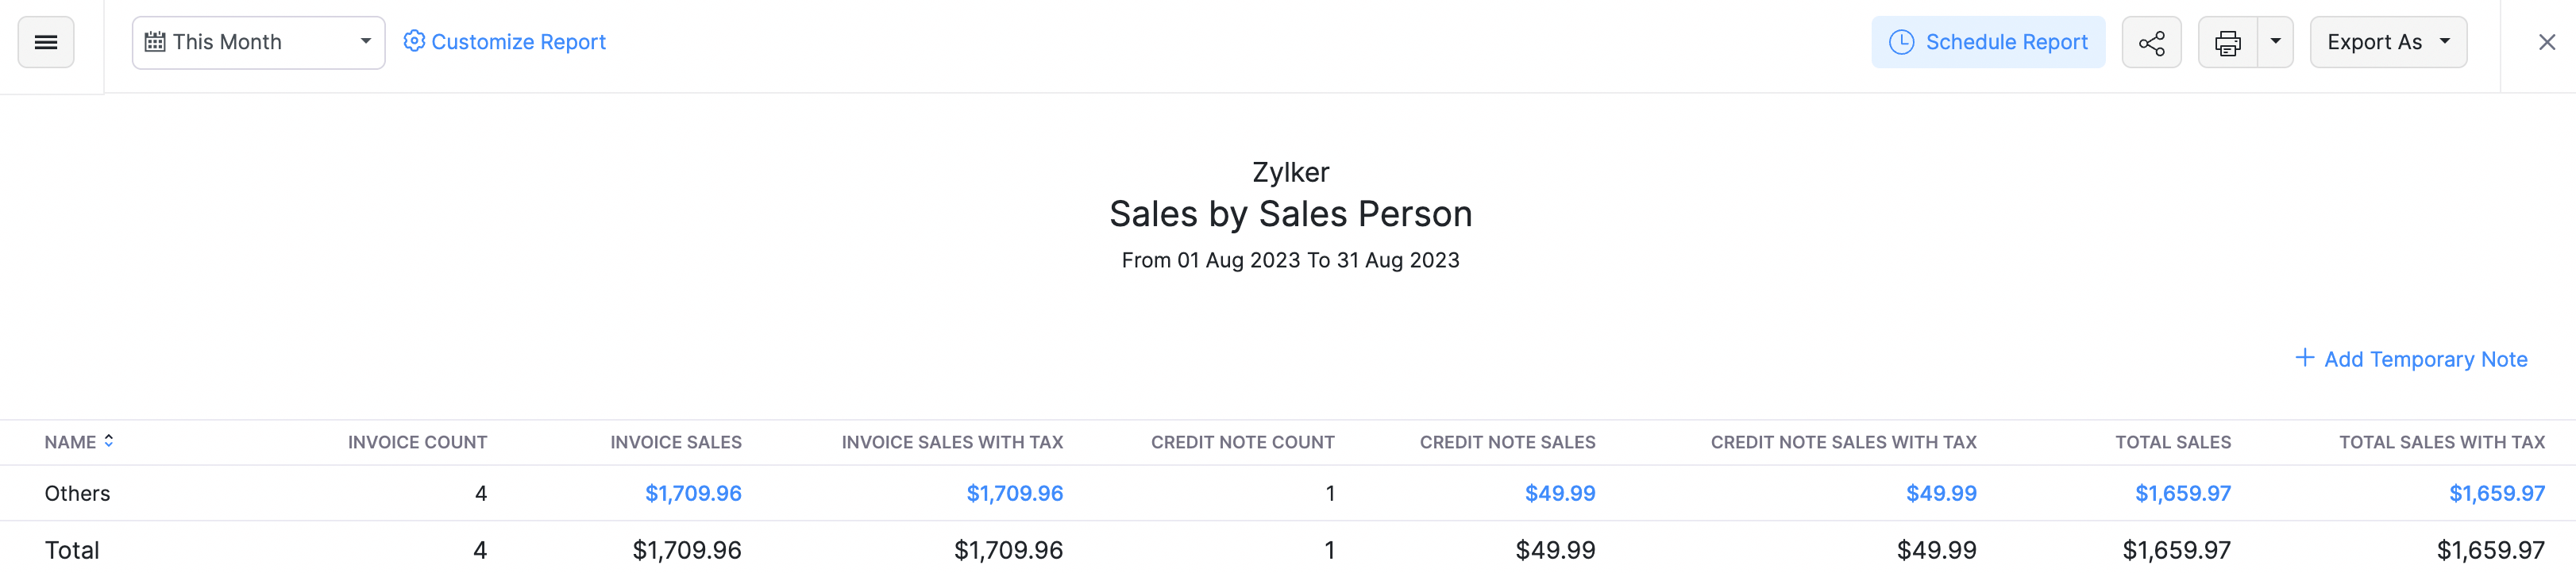 Sales by Salesperson Report